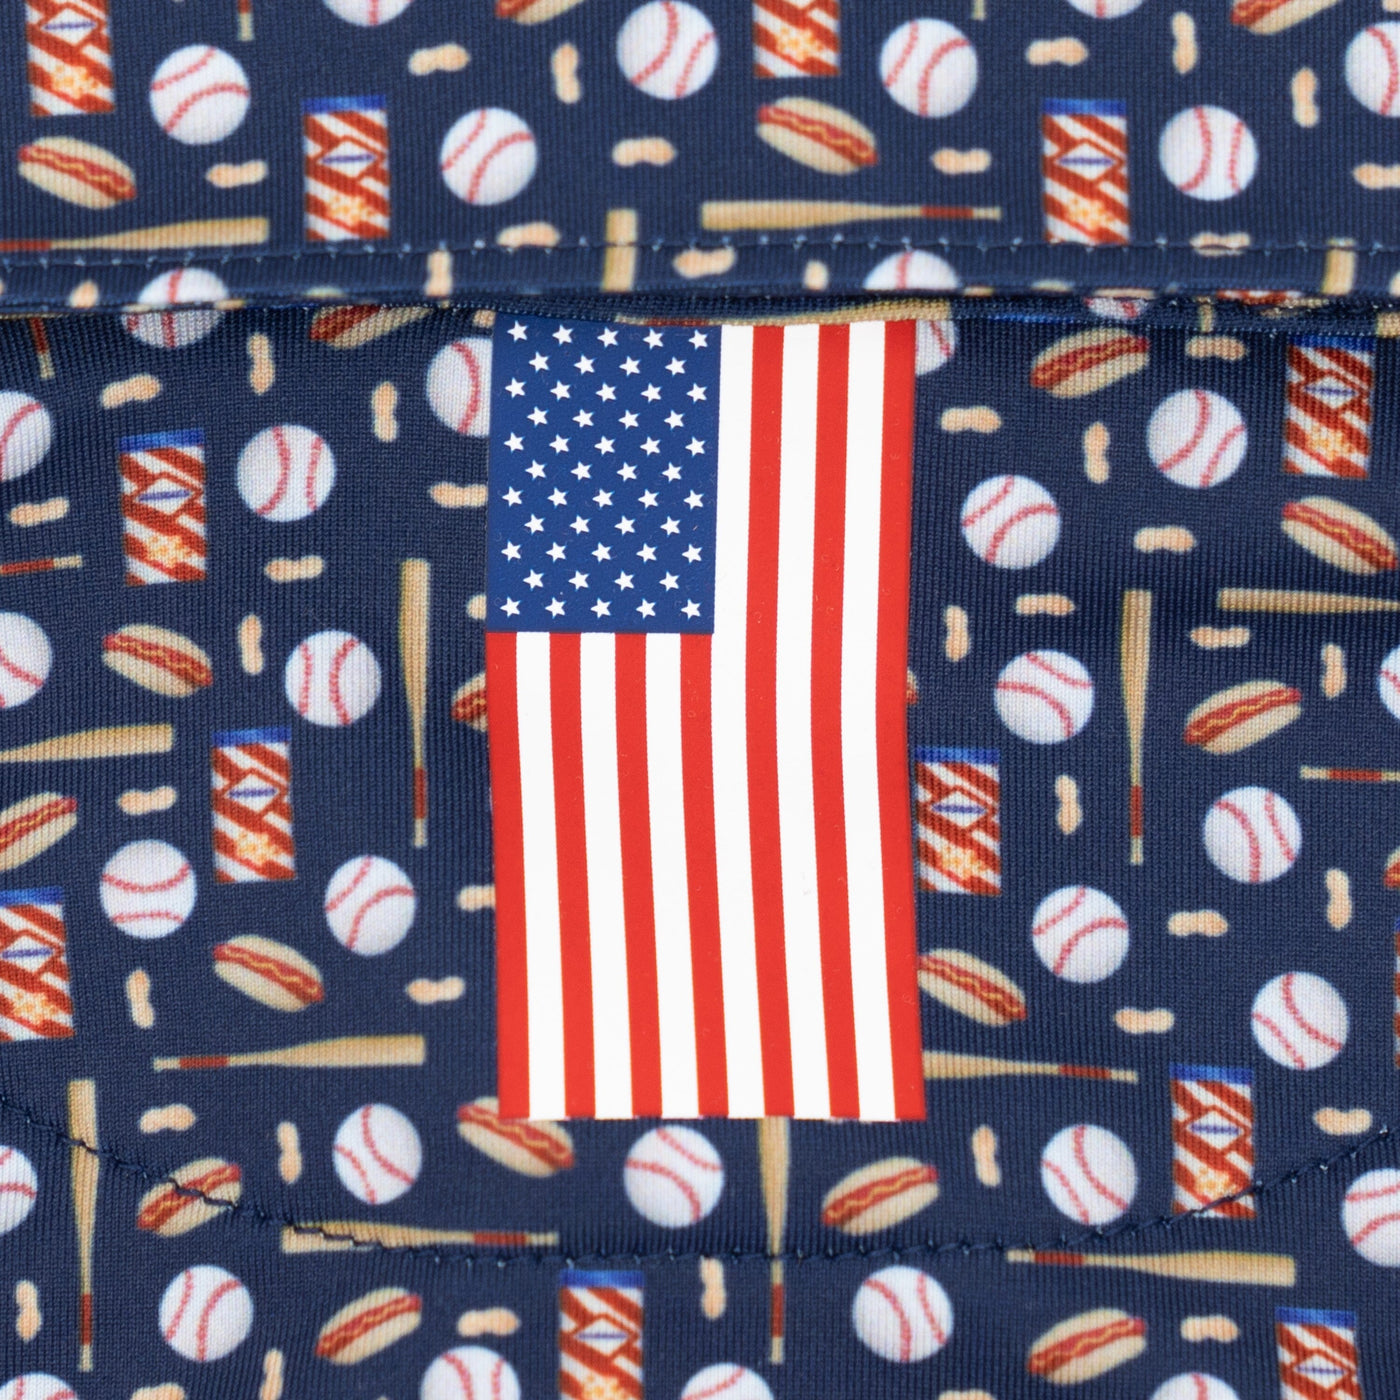 The Lil' 7th Inning Stretch - USA